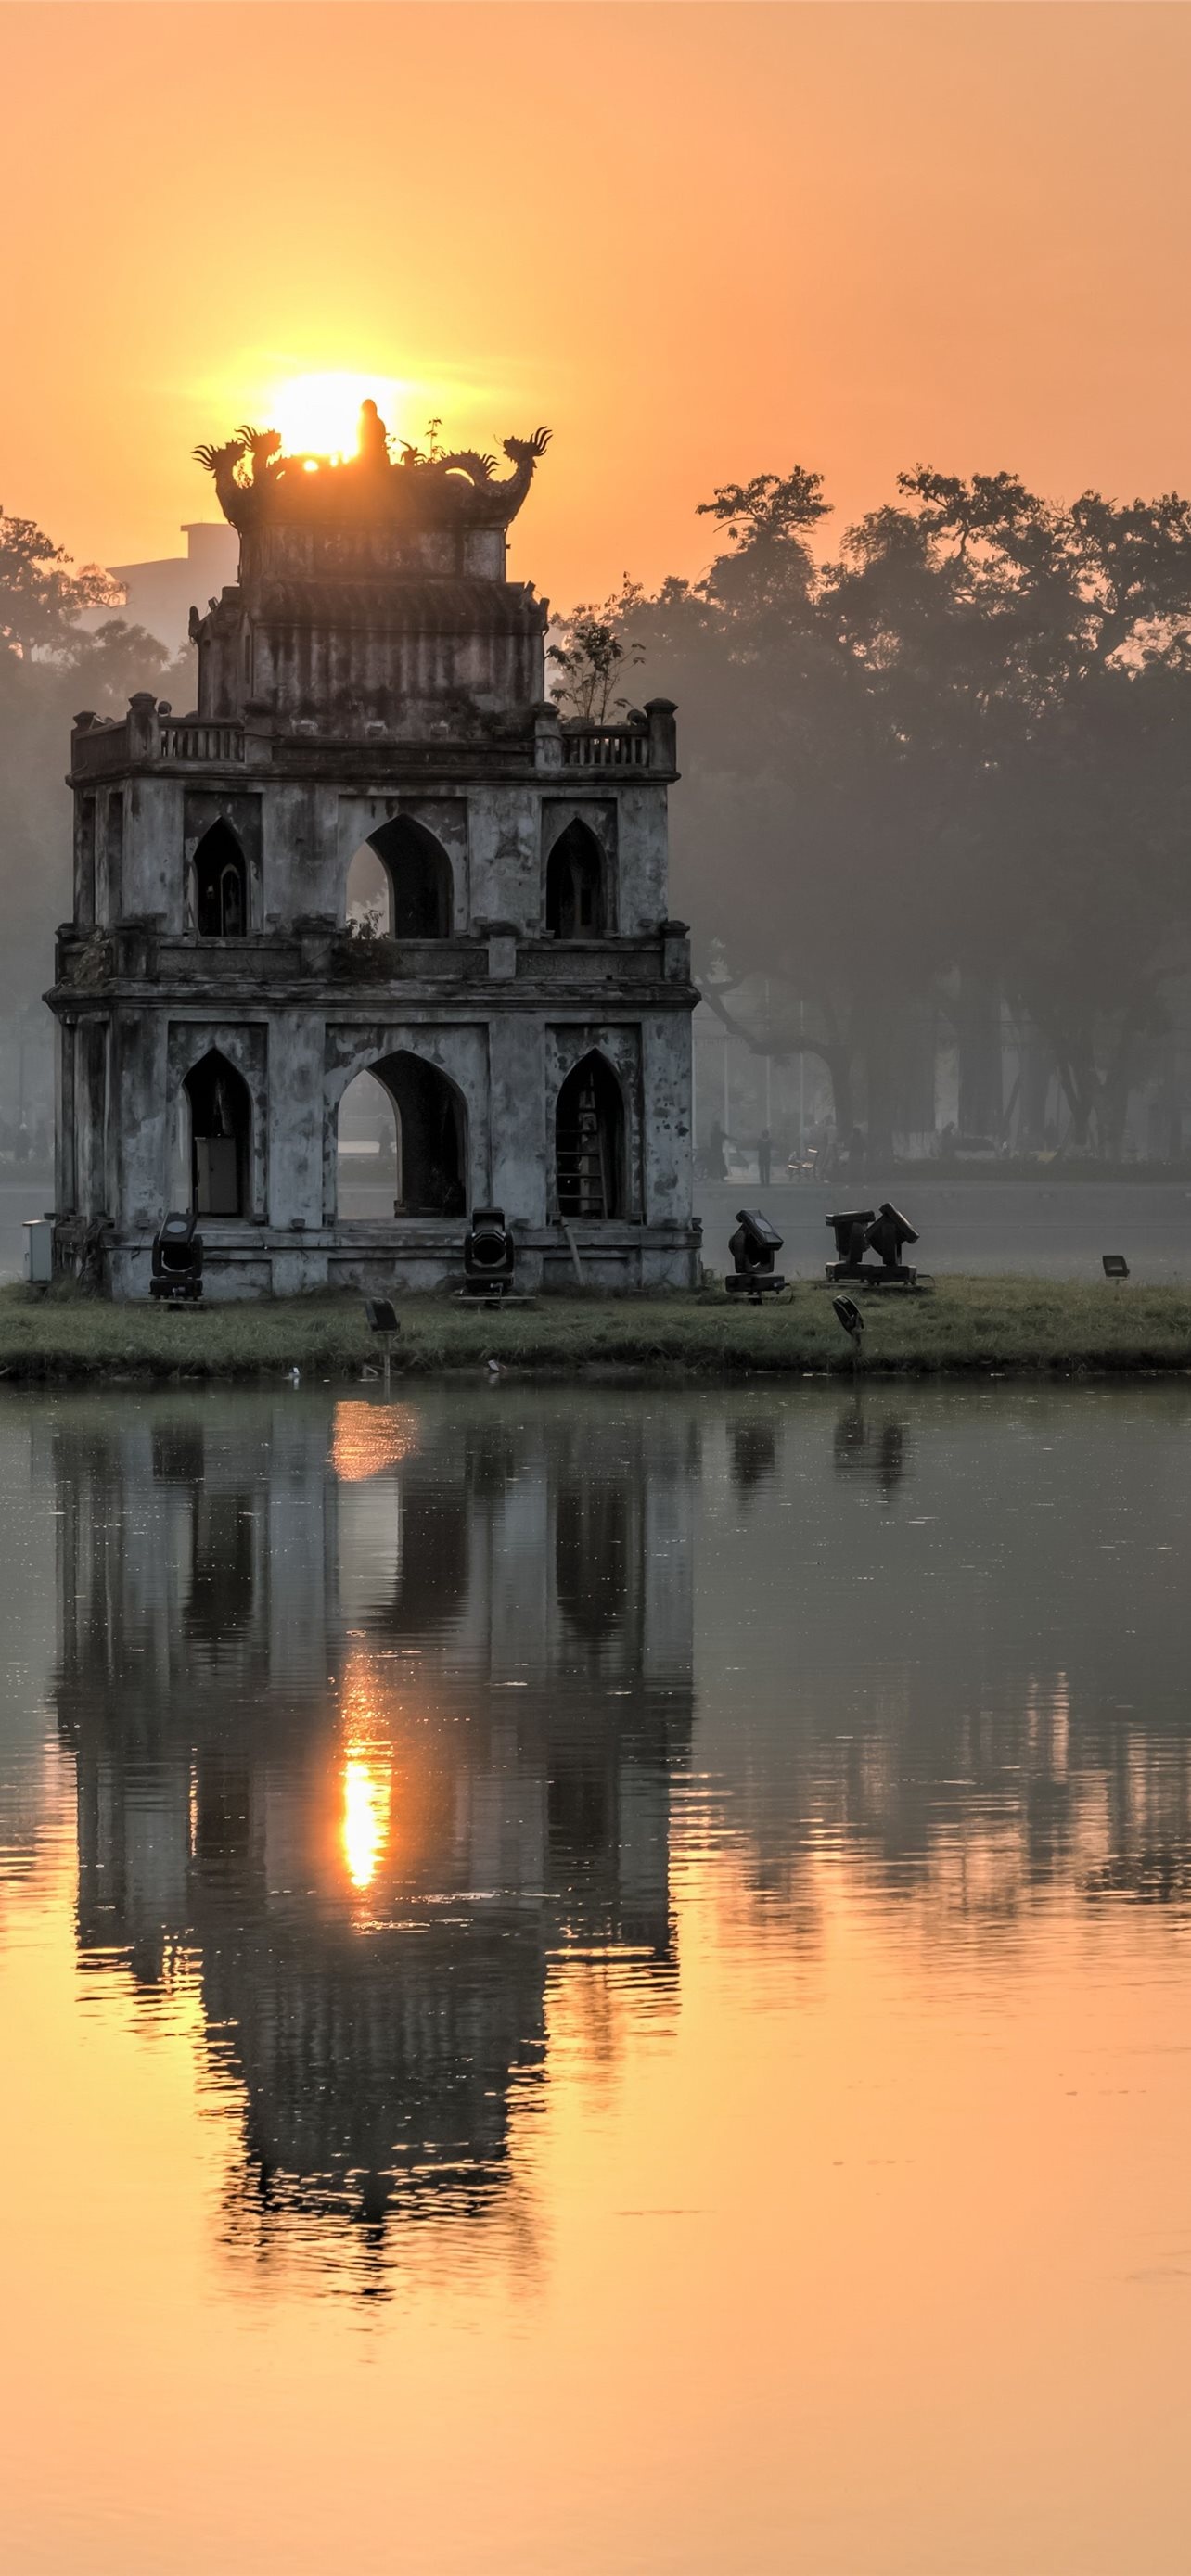 Best Hanoi iPhone wallpapers, Captivating backgrounds, HD cityscapes, 1290x2780 HD Handy